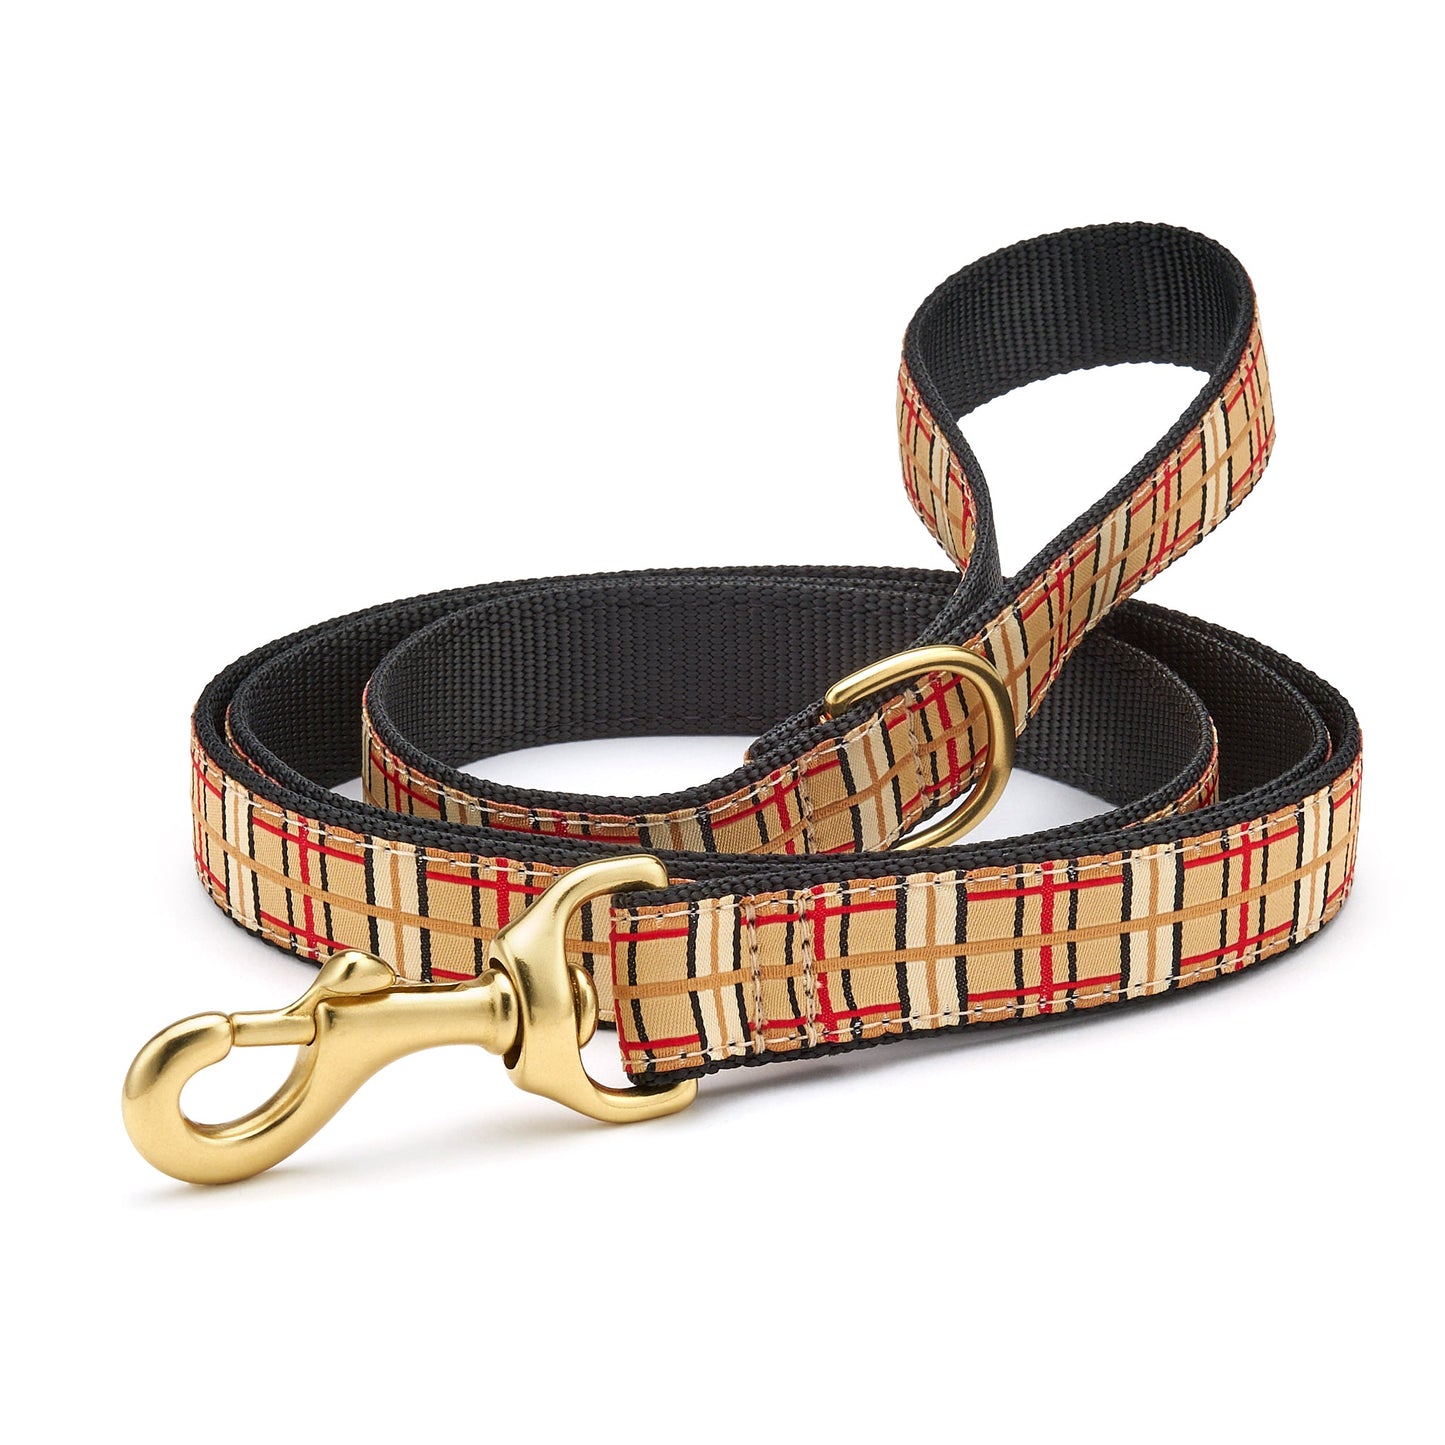 Up Country Plaid Dog Lead by Up Country